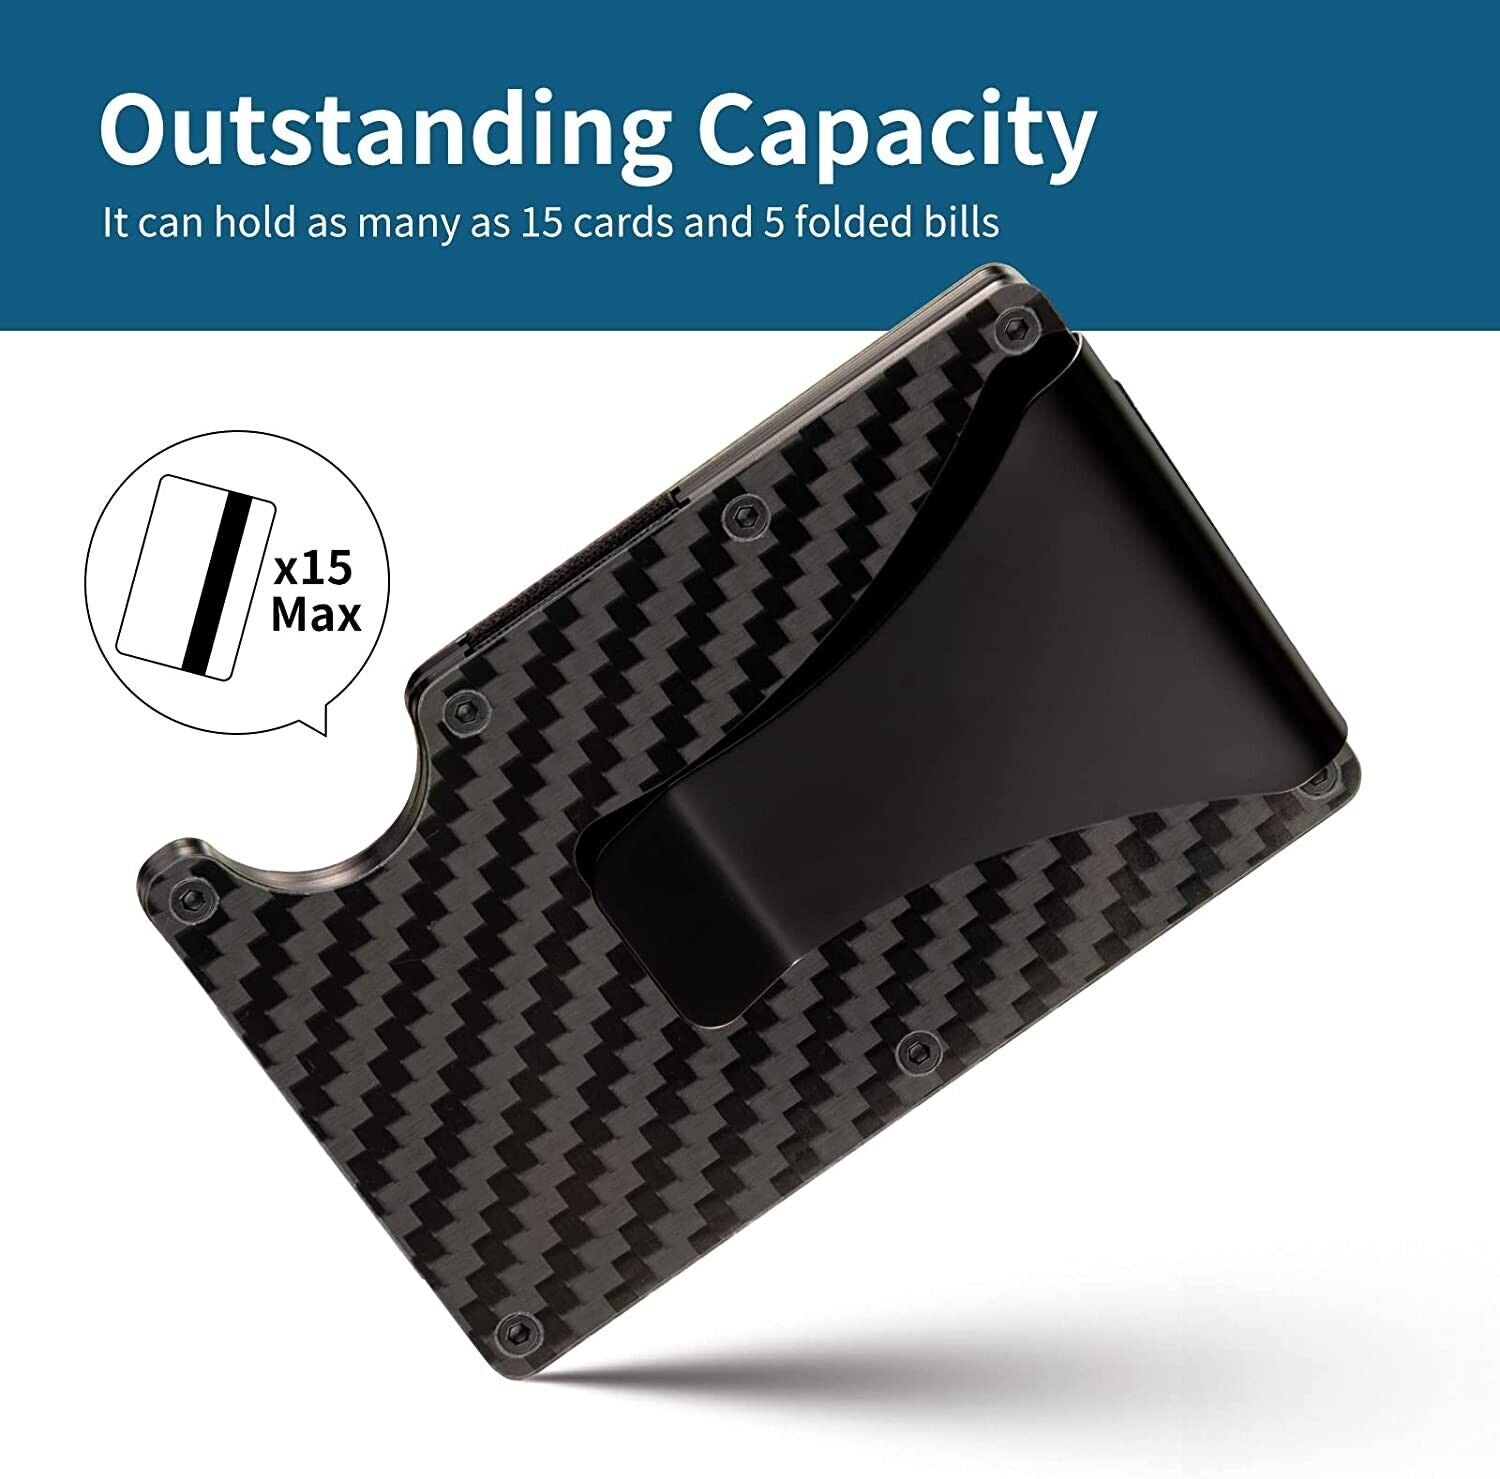 Carbon Fiber Slim Money Clip RFID Card Holder – A Stylish and Secure Metal Men's Wallet, Ideal for Gifting